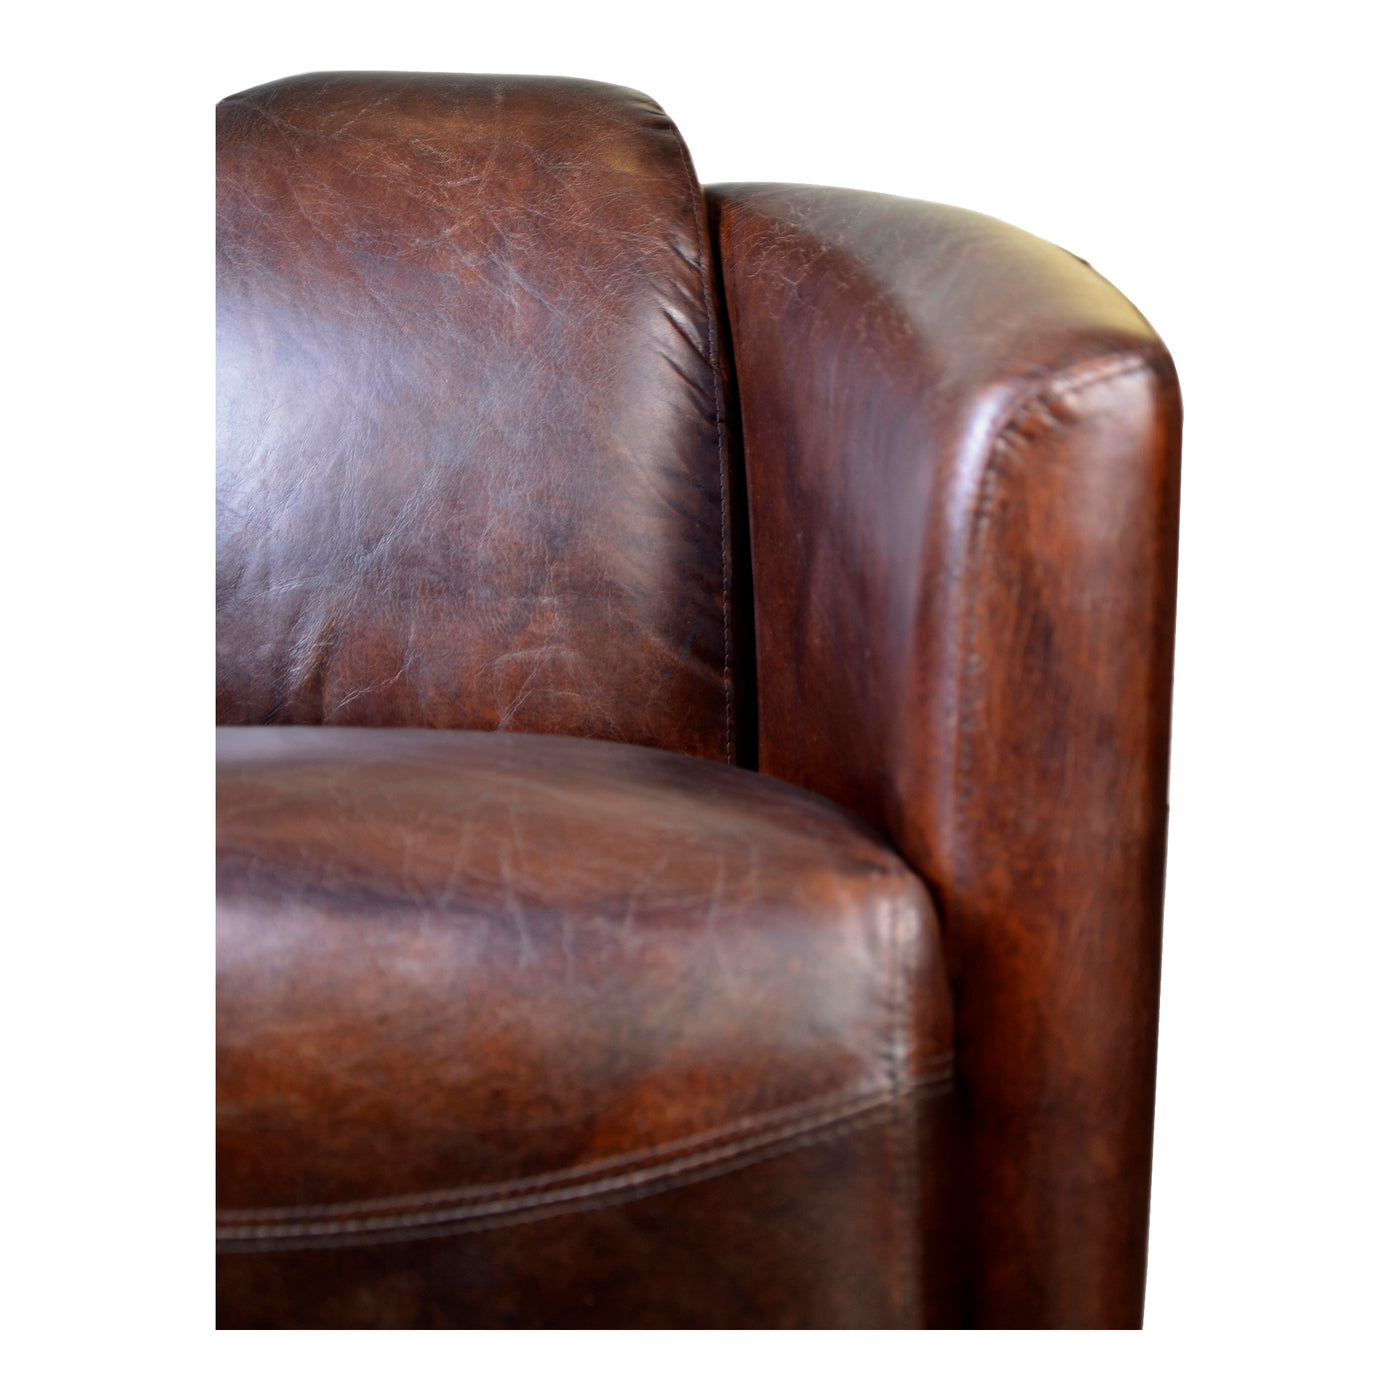 A classic-style leather club chair that boasts unique, sculptural form. The Salzburg club is an ideal accent for the moder...